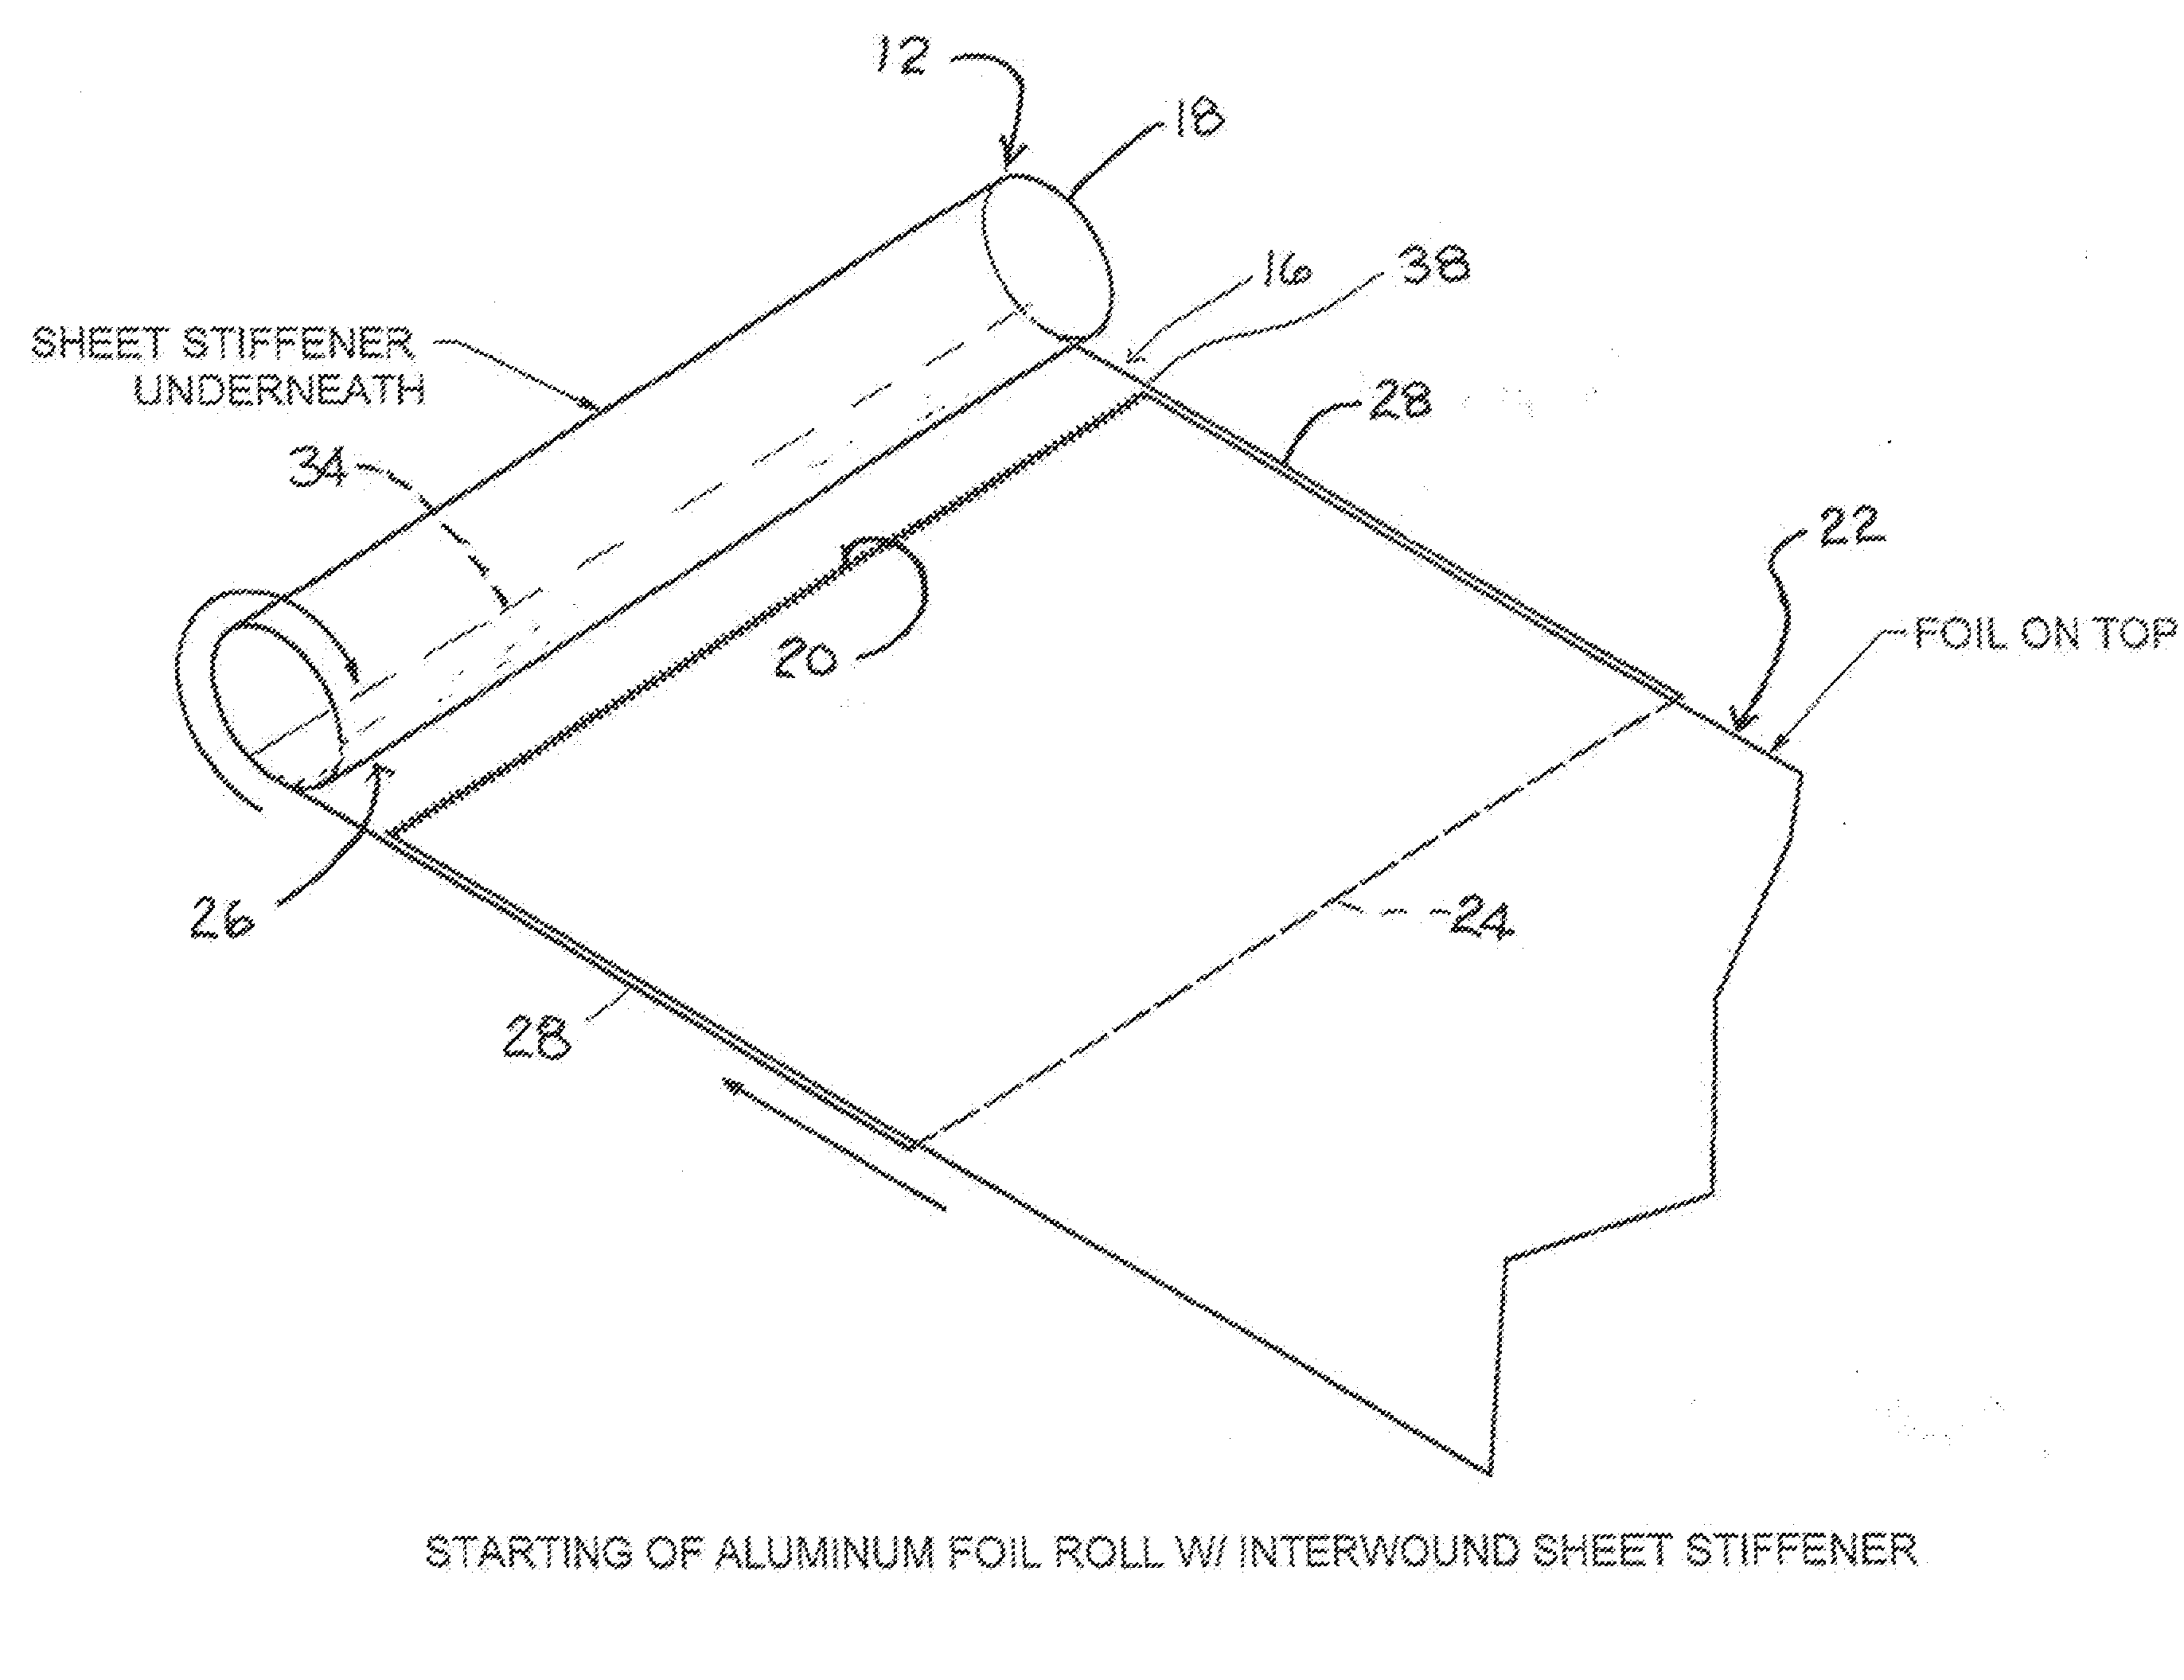 Foil roll with wound stiffening core, apparatus for winding the roll and method